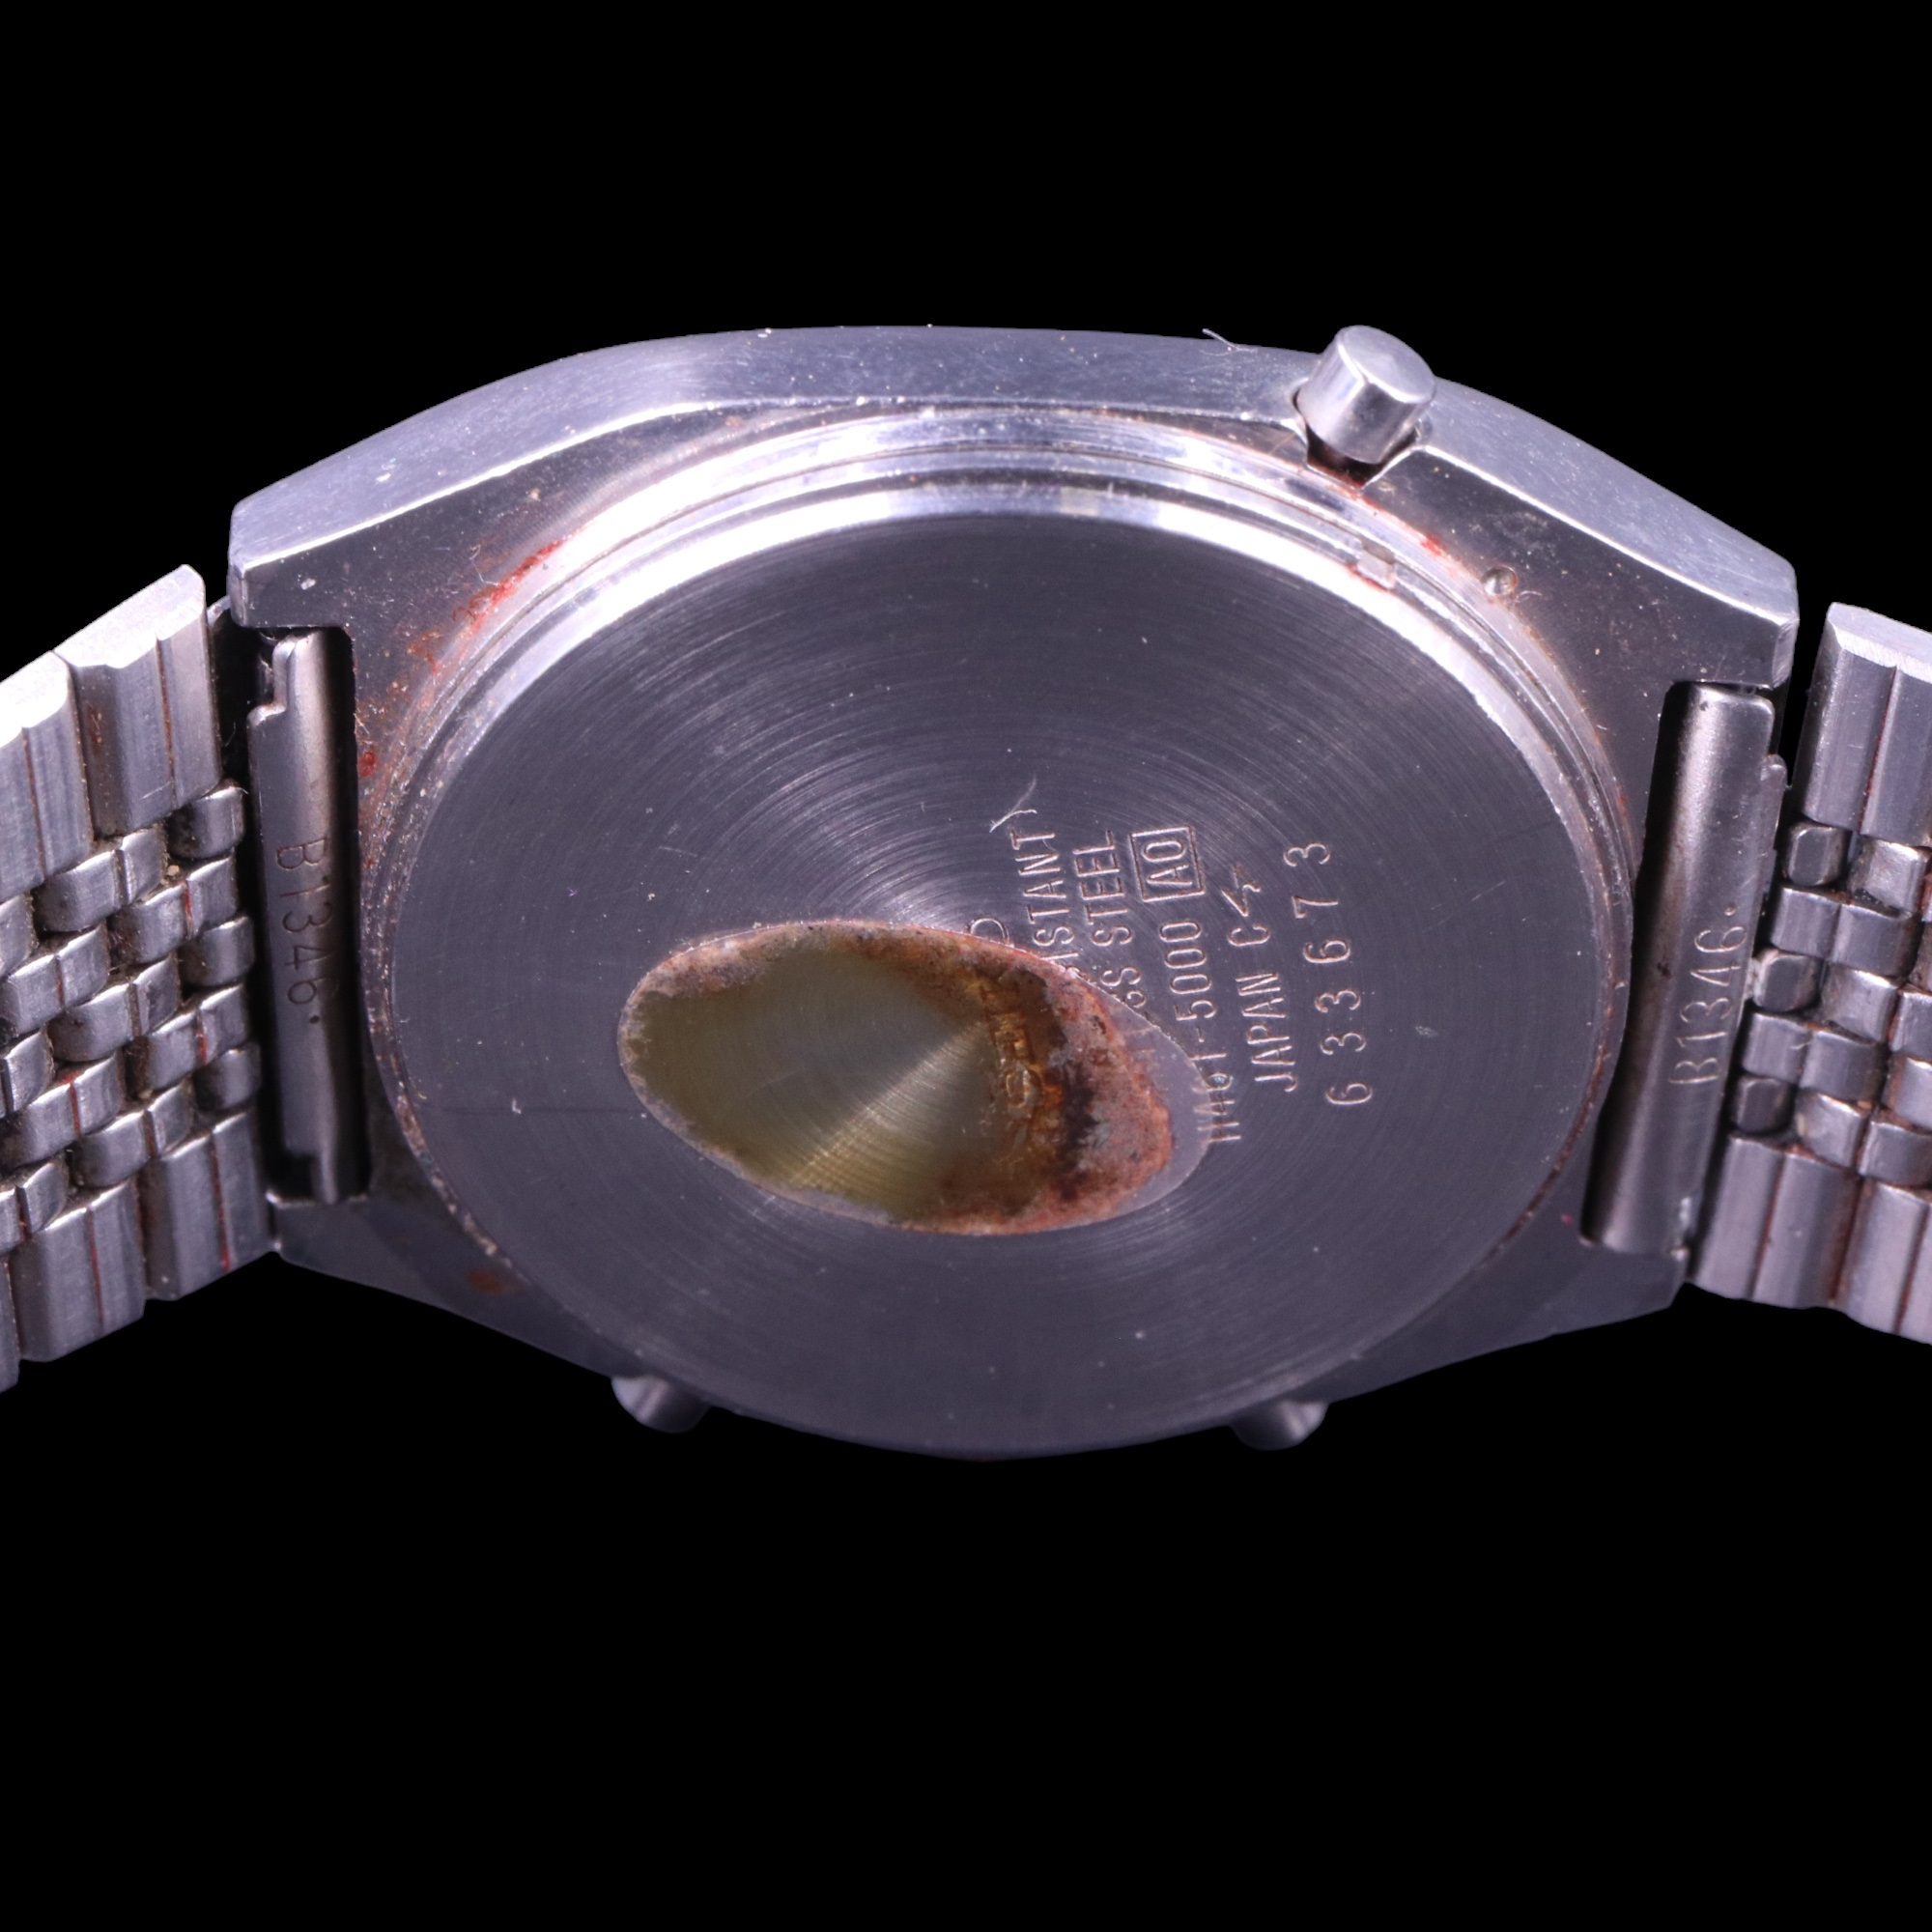 A Seiko Alarm Chronograph digital analogue stainless steel wristwatch together with a Shivas and - Image 3 of 3